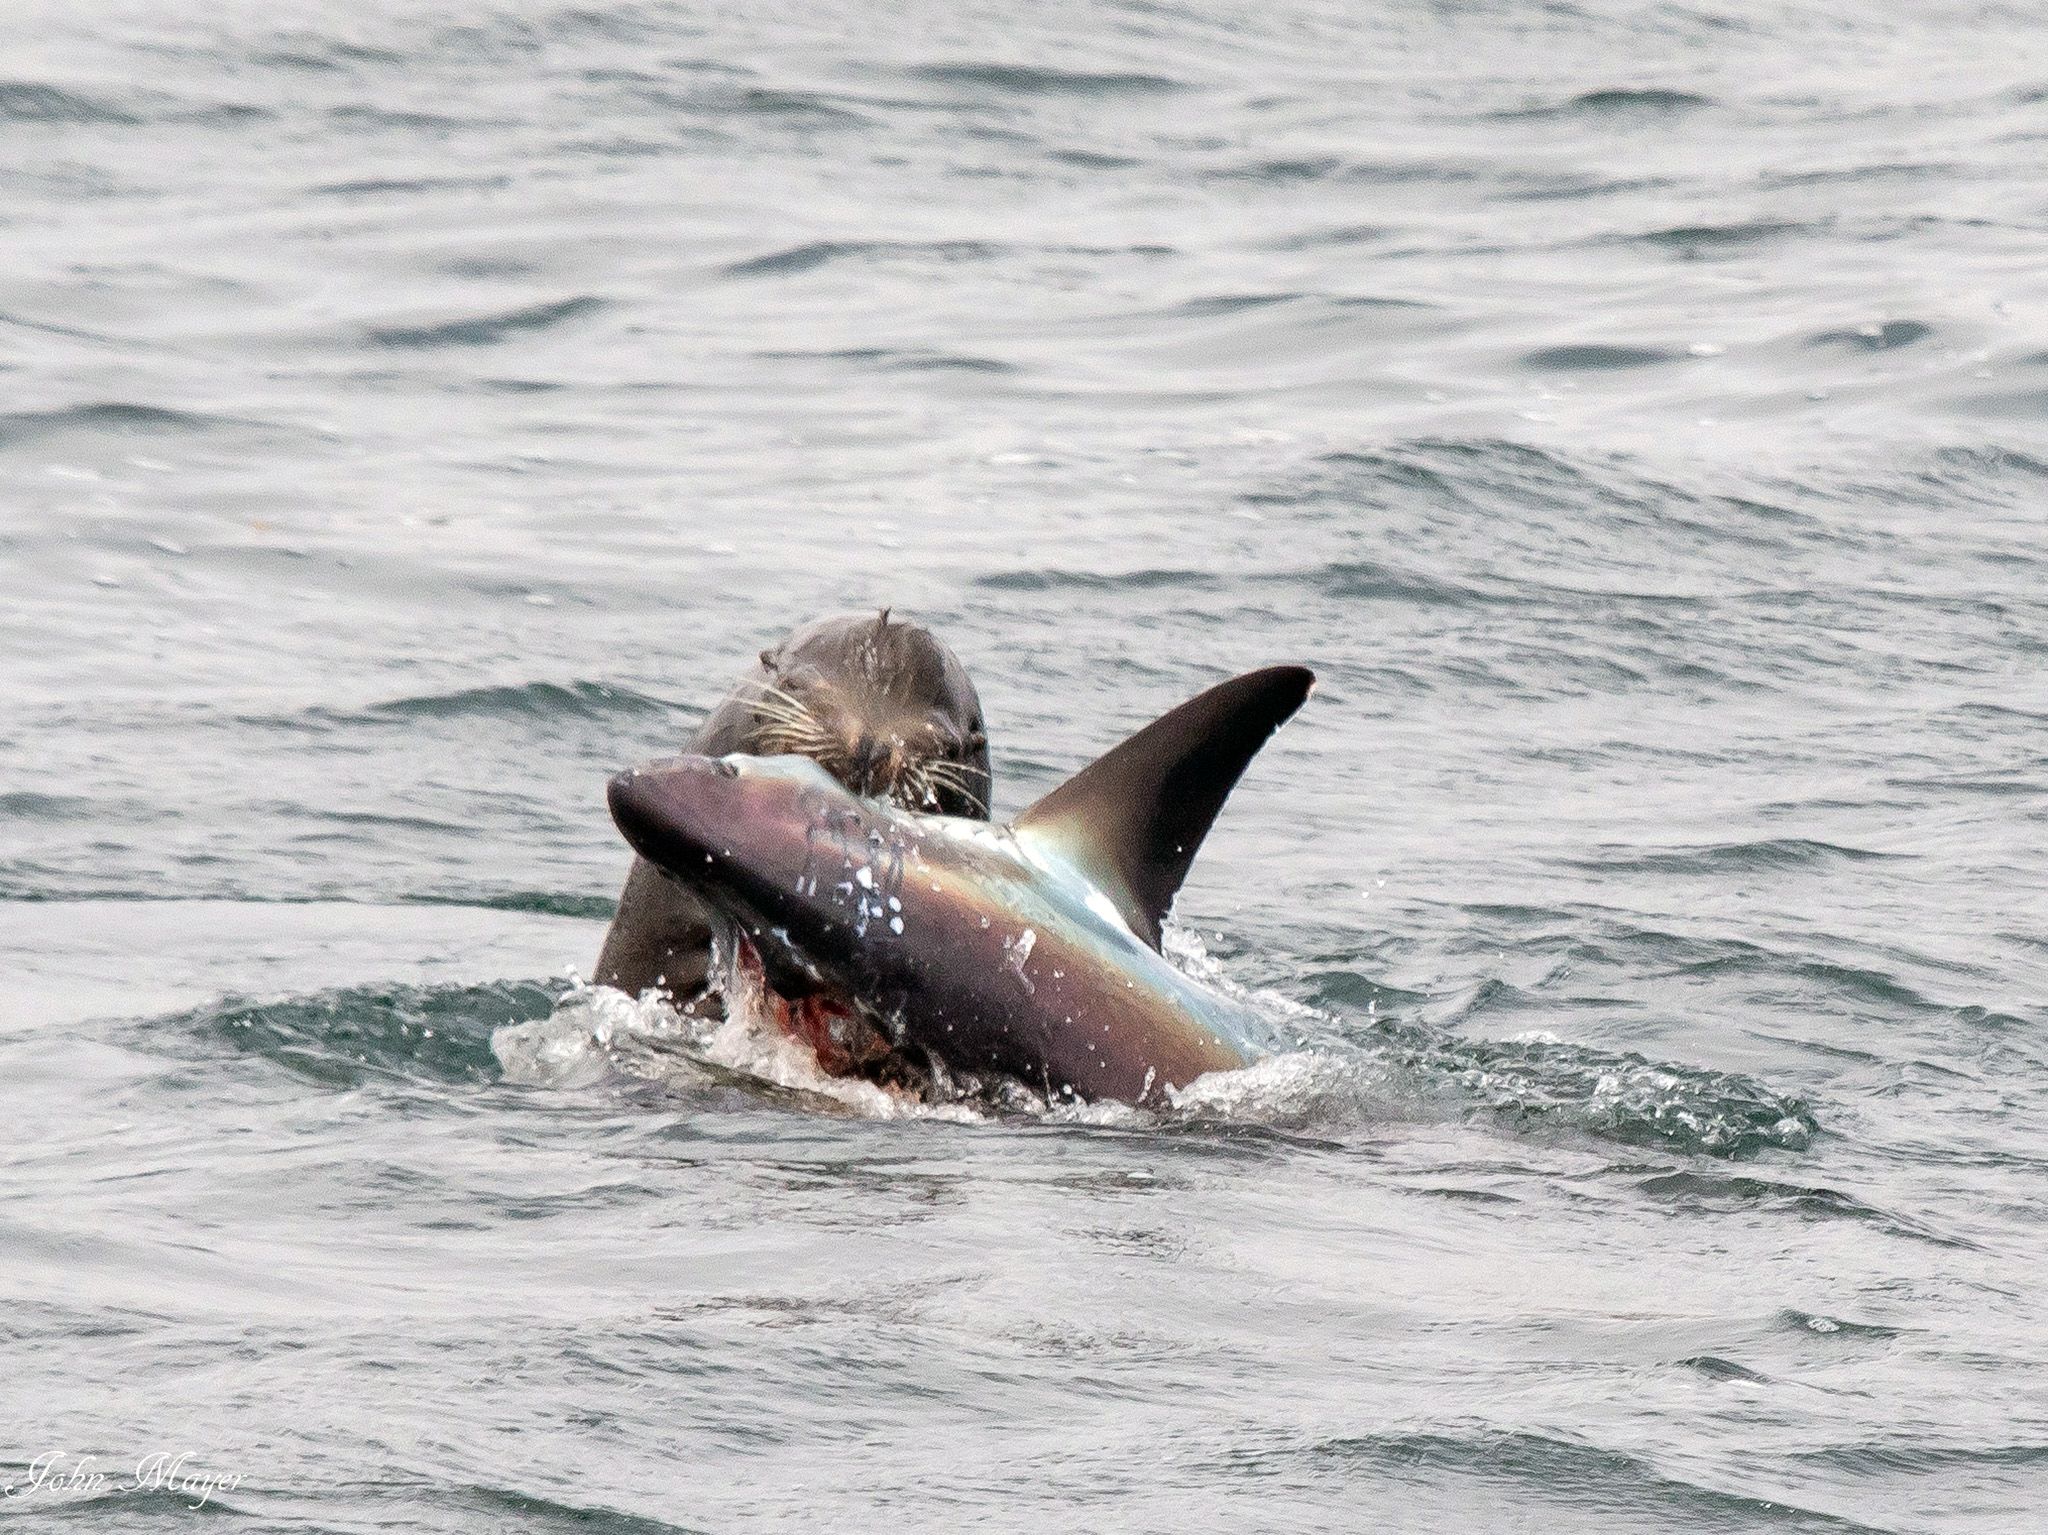 Newport Beach, CA: A sea lion attacks a thresher shark. This image is from Shark V. Predator. [Photo of the day - August 2017]